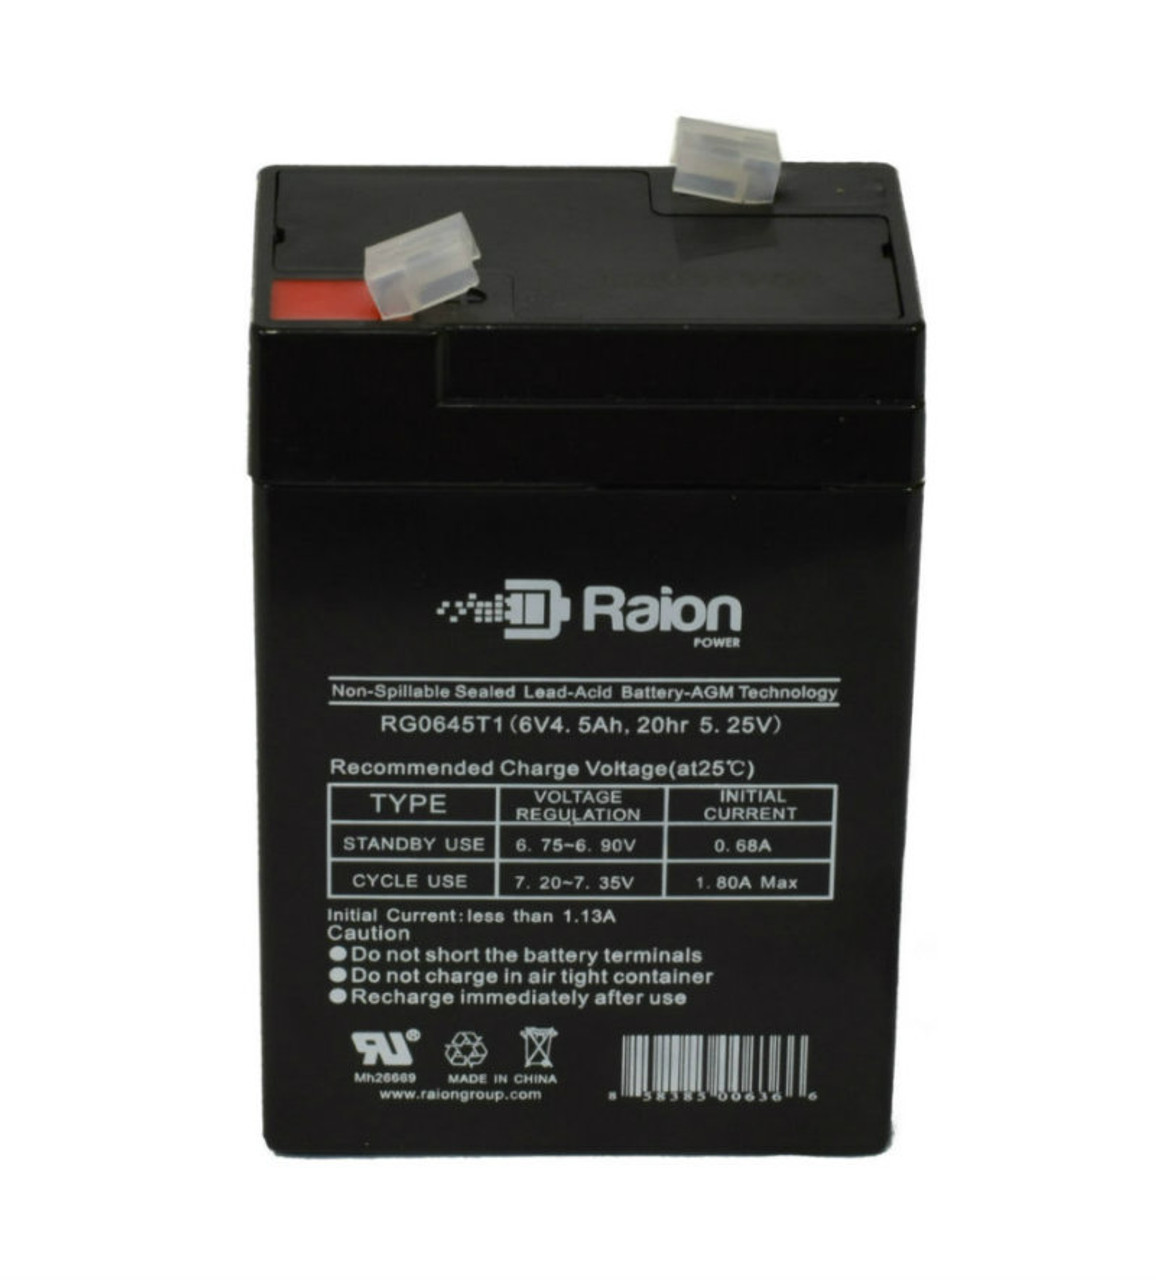 Raion Power RG0645T1 Replacement Battery Cartridge for Light Alarms U8